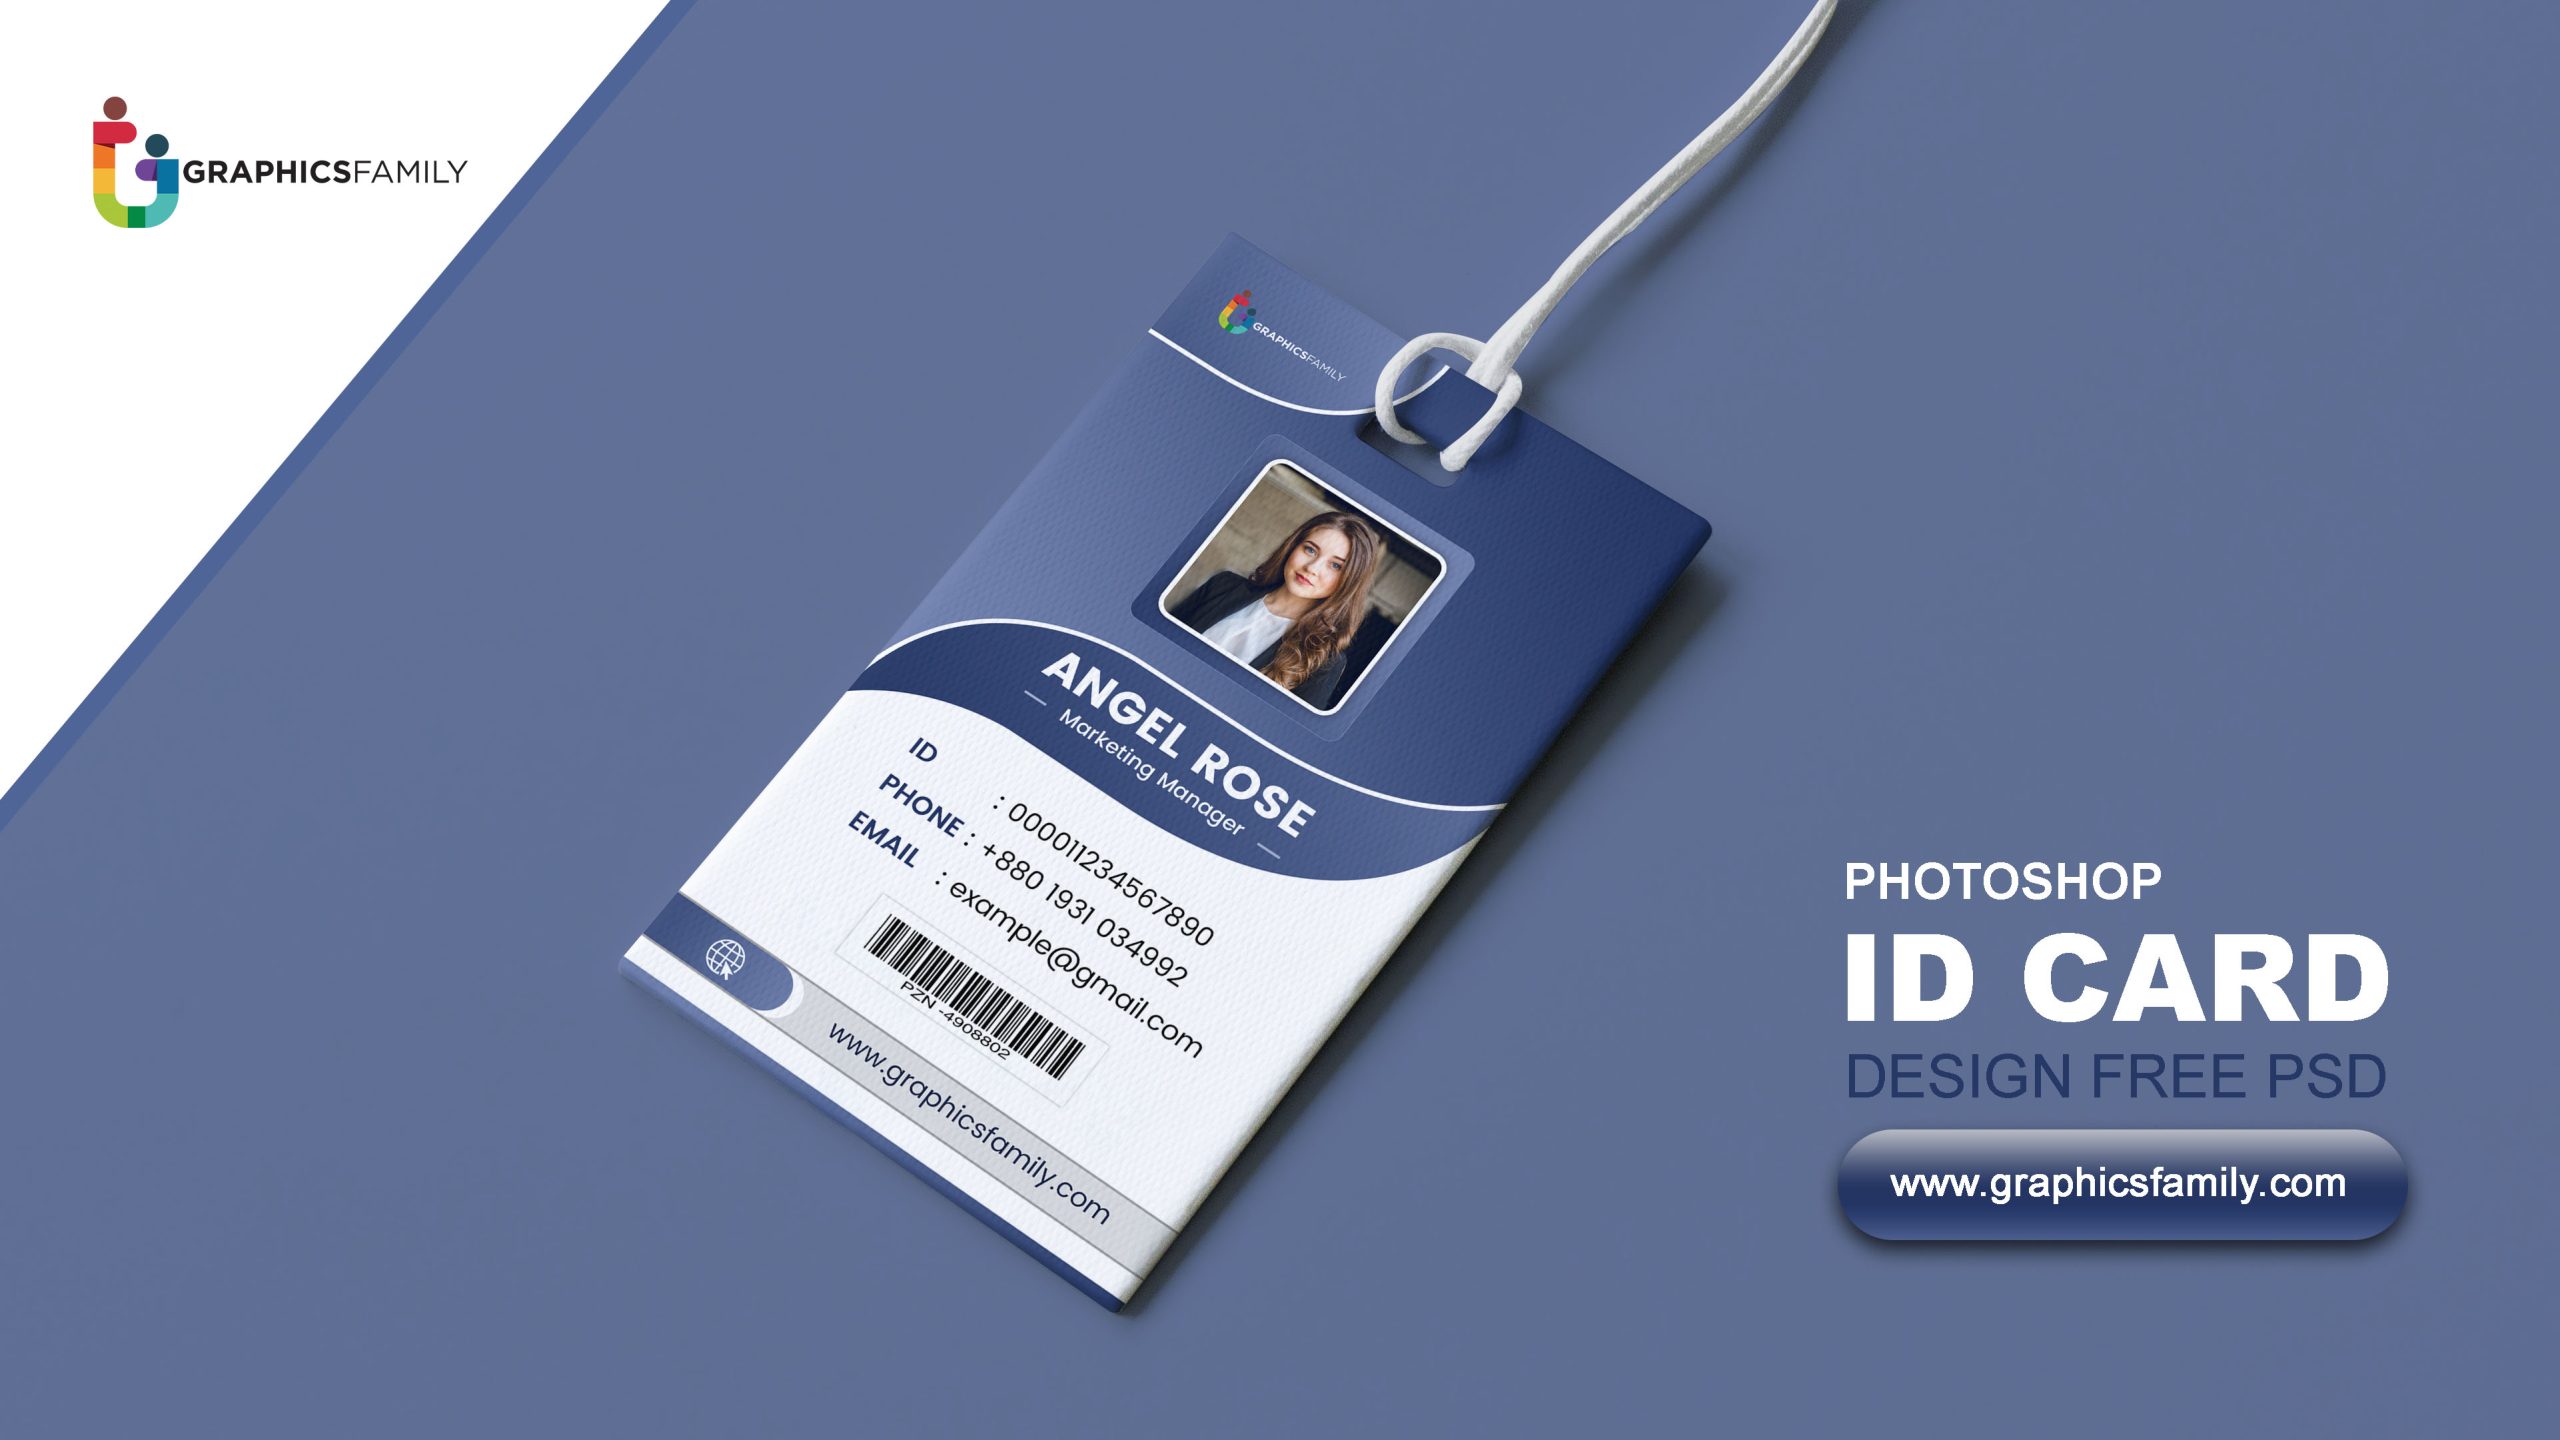 Event organizer ID Card Template in PSD, Illustrator - Download